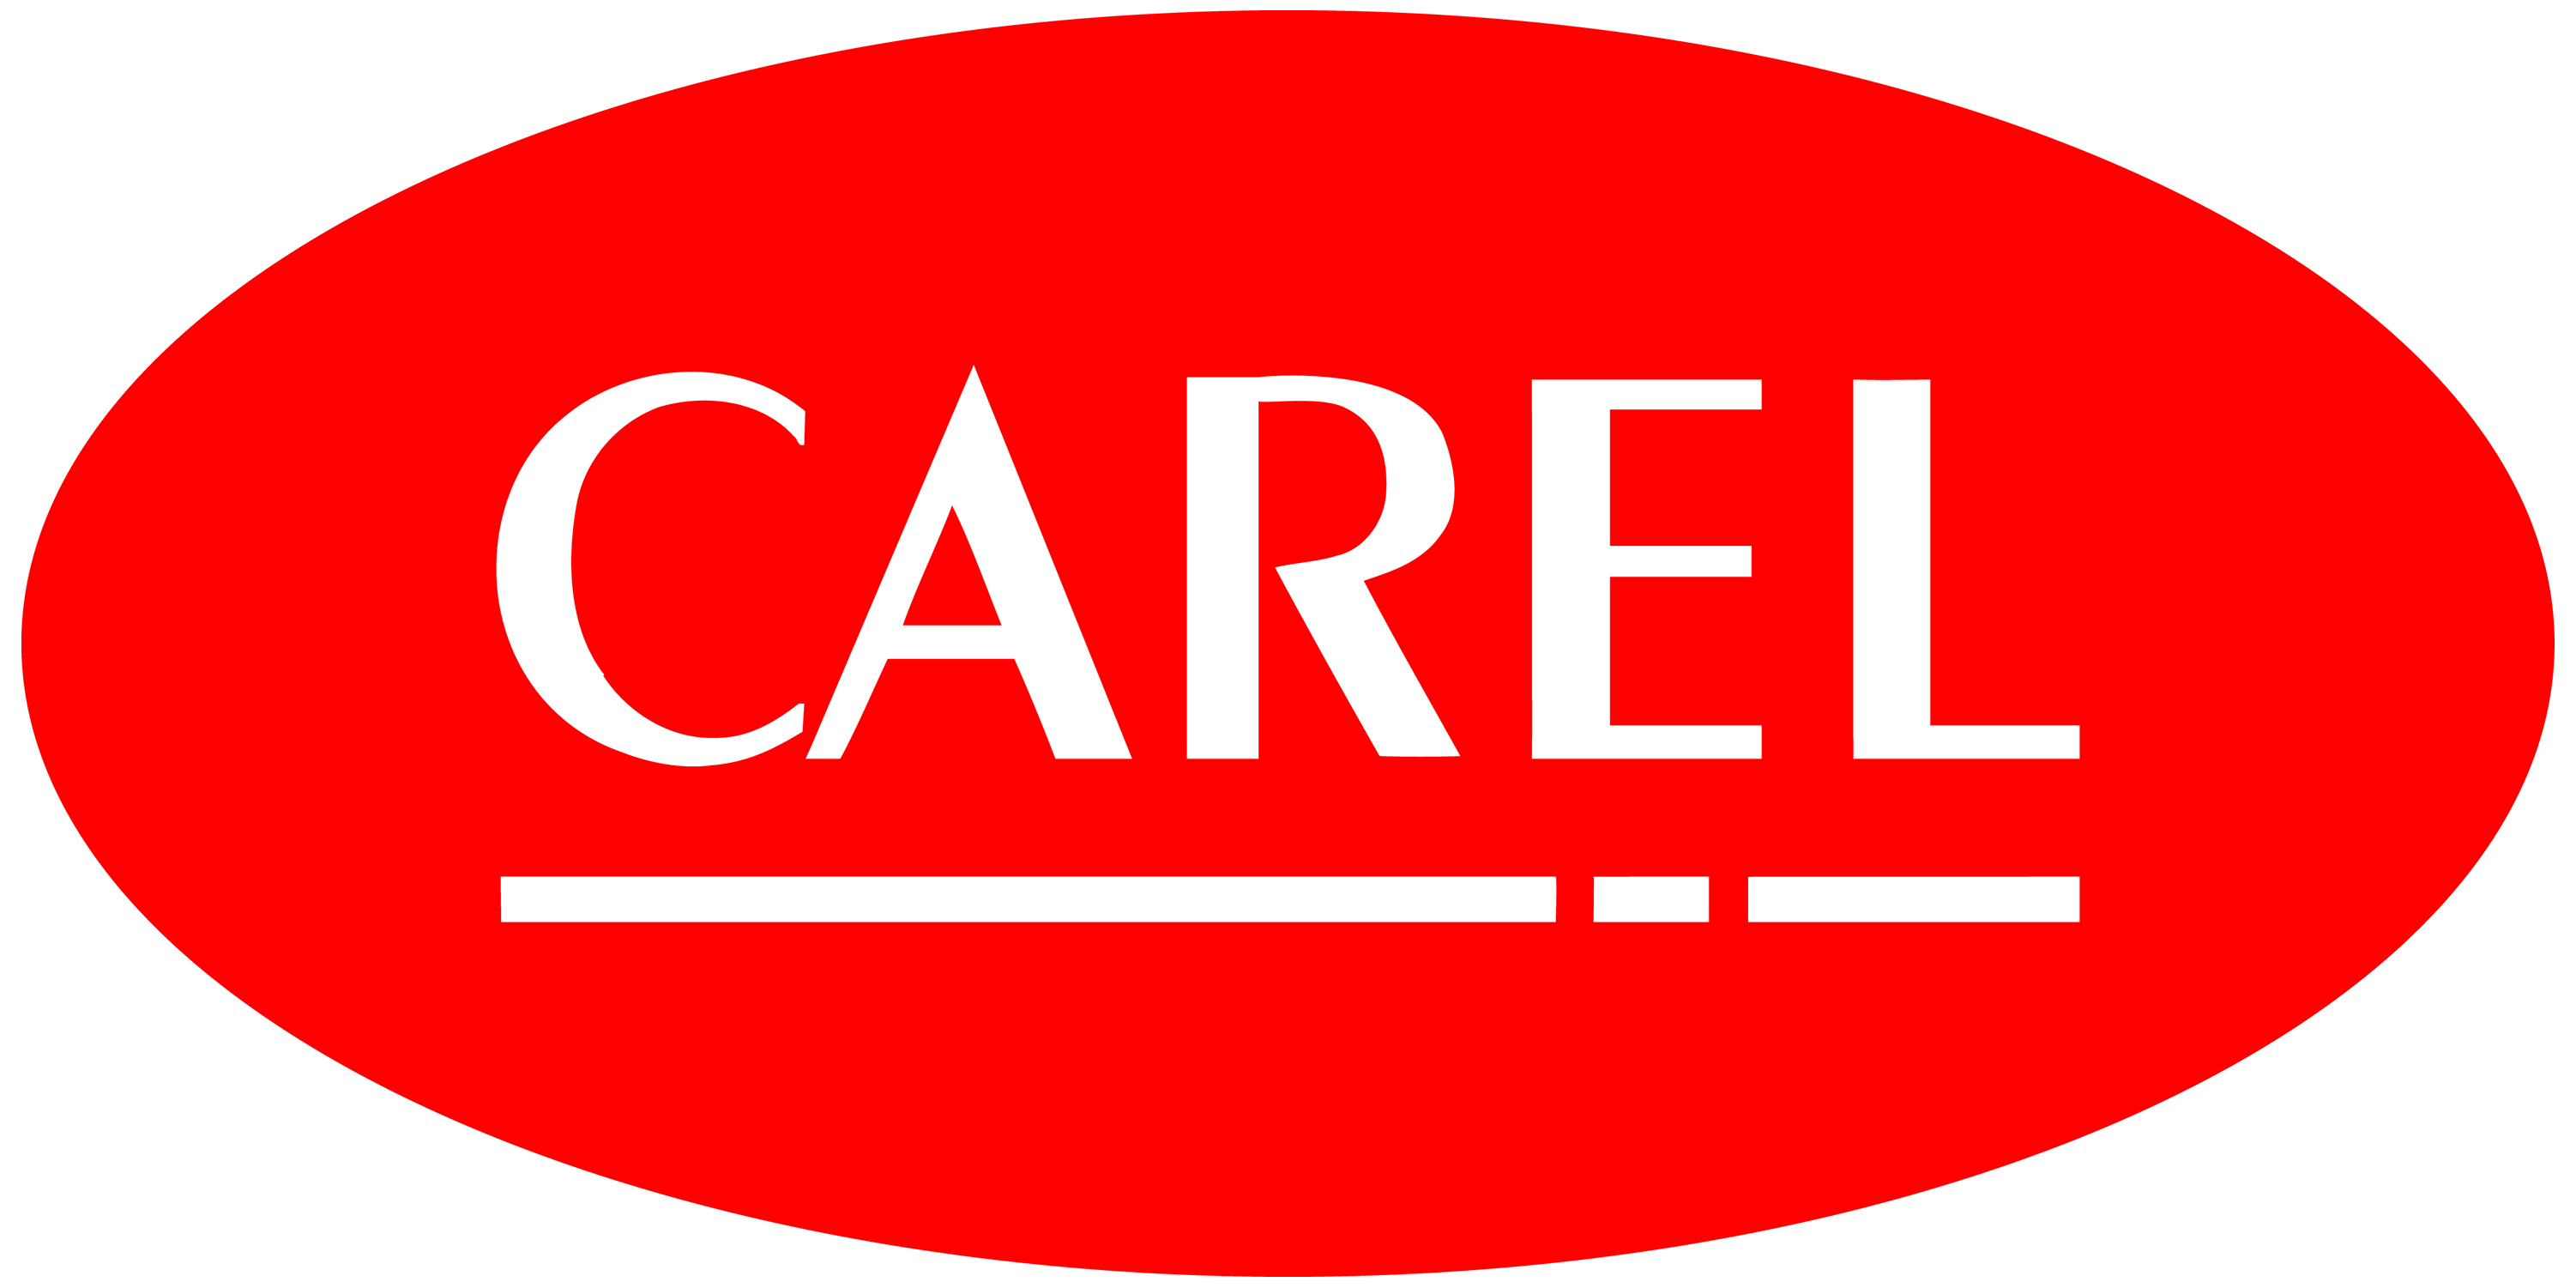 CAREL protects and promotes the health and safety of workers